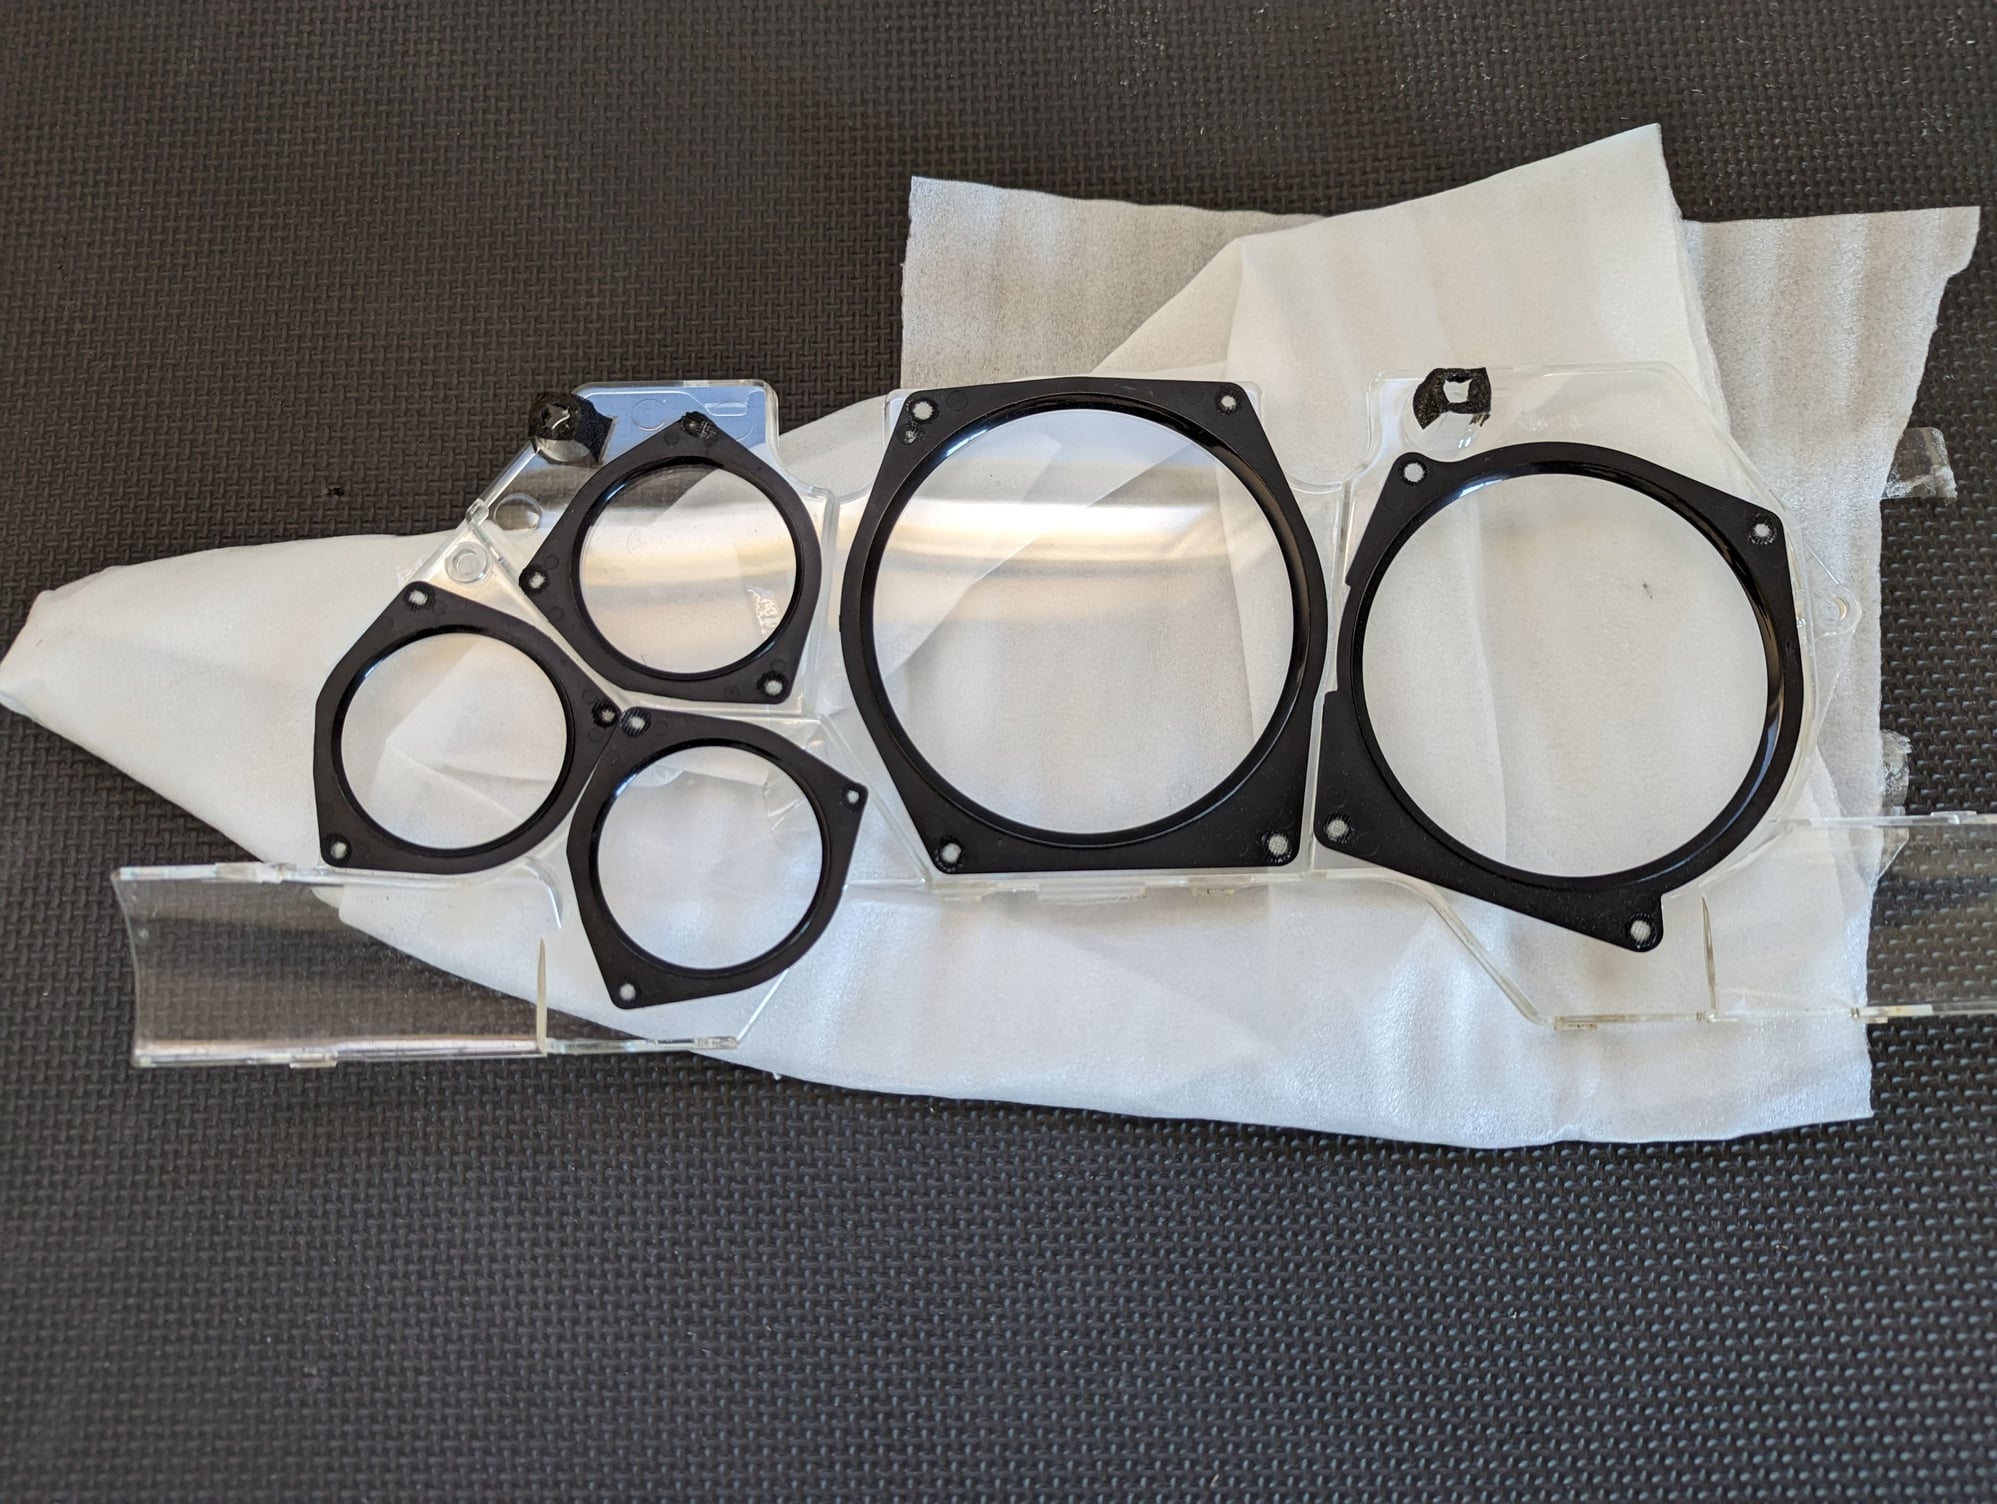 Miscellaneous - FS: JDM Instrument Cluster, Tach, Black-Bezel Gauge Lens - Used - 1993 to 1995 Mazda RX-7 - Winchester, CA 92596, United States